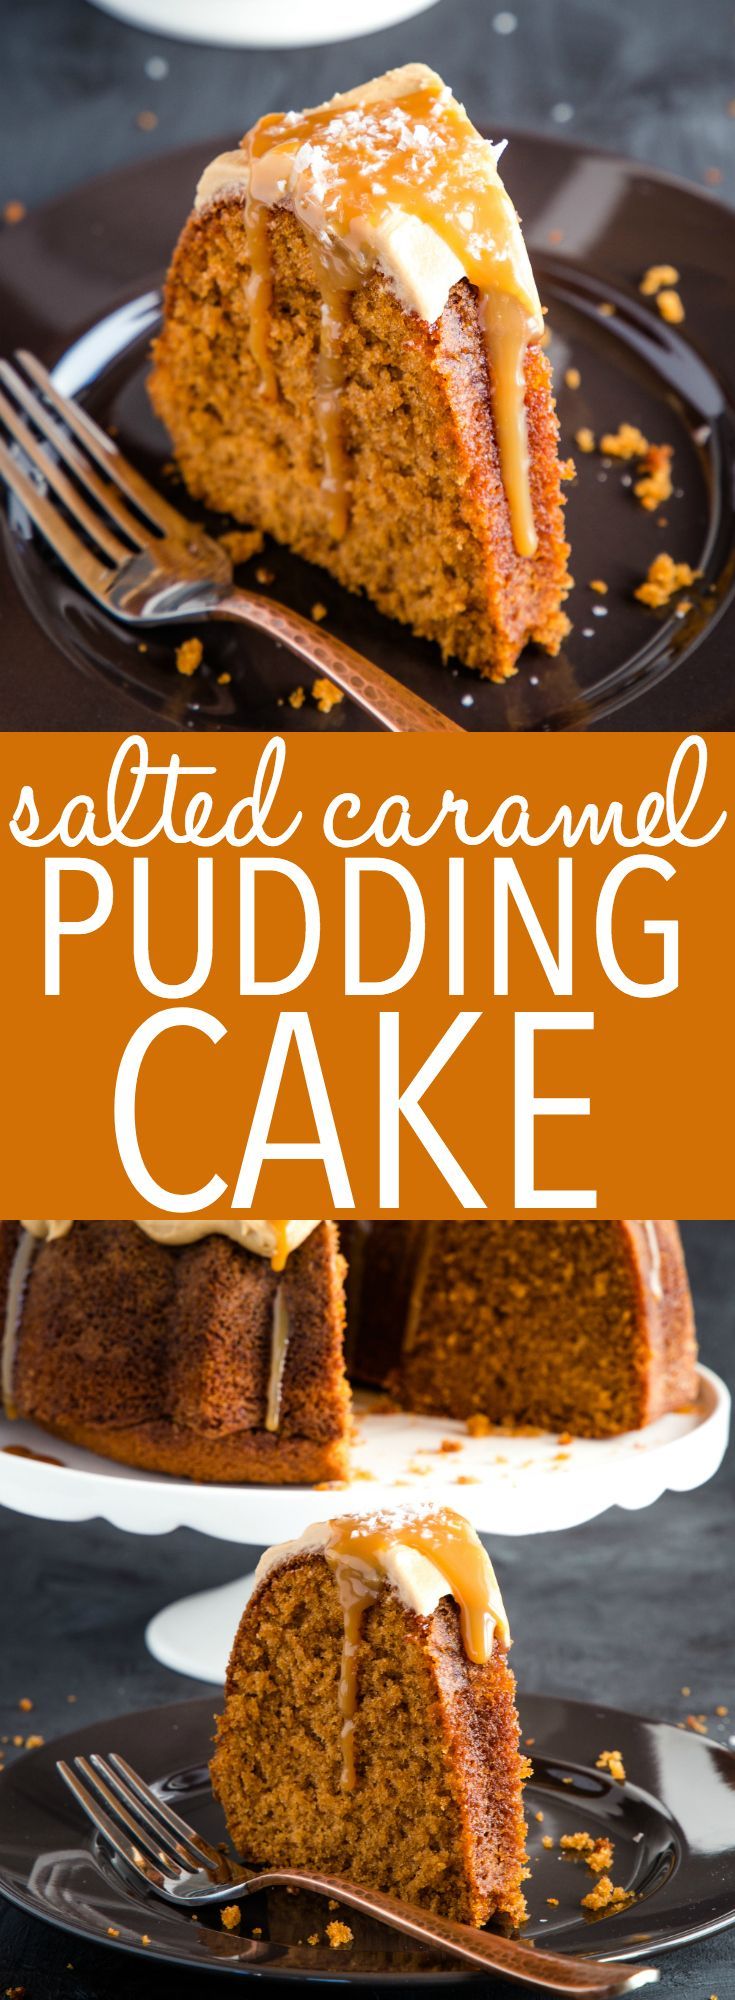 Best Ever Salted Caramel Pudding Cake - The Busy Baker -   17 desserts Winter pudding cake ideas